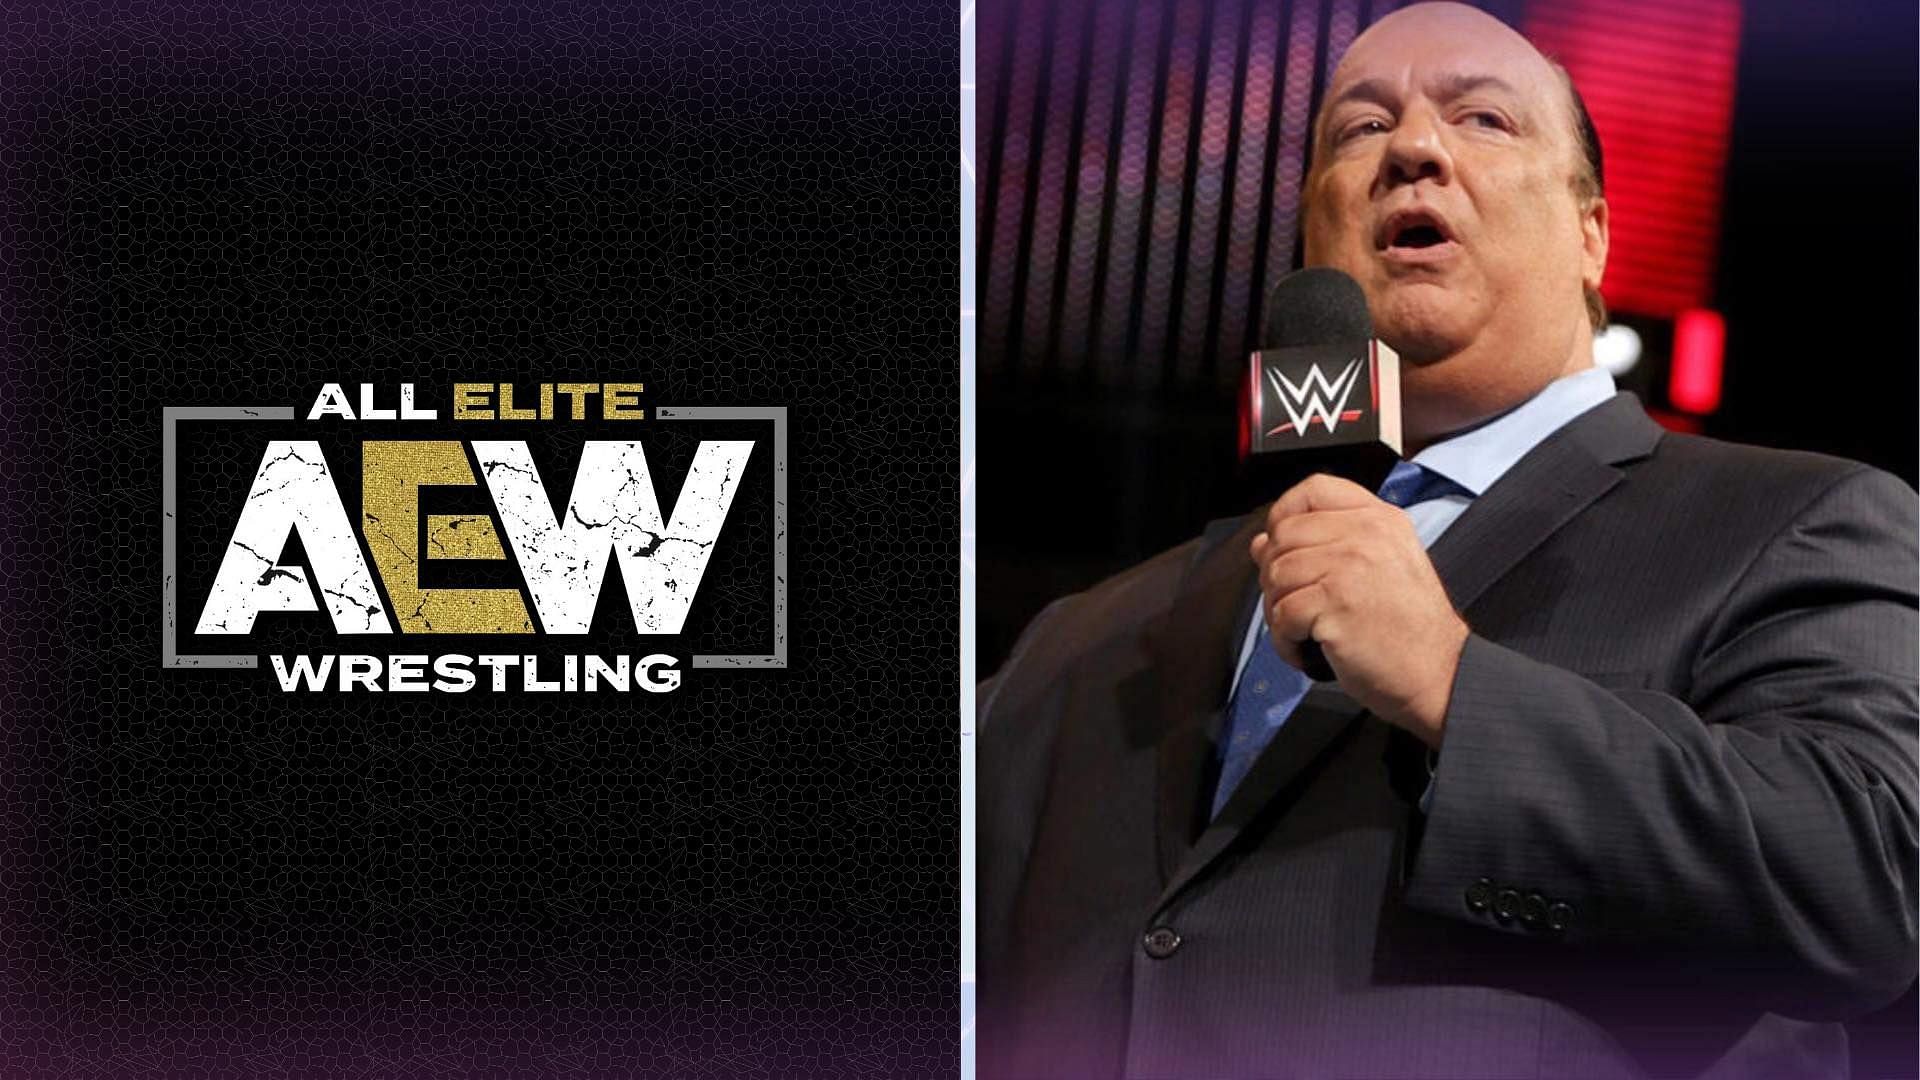 Paul Heyman is the special counsel to the Tribal Chief, Roman Reigns 